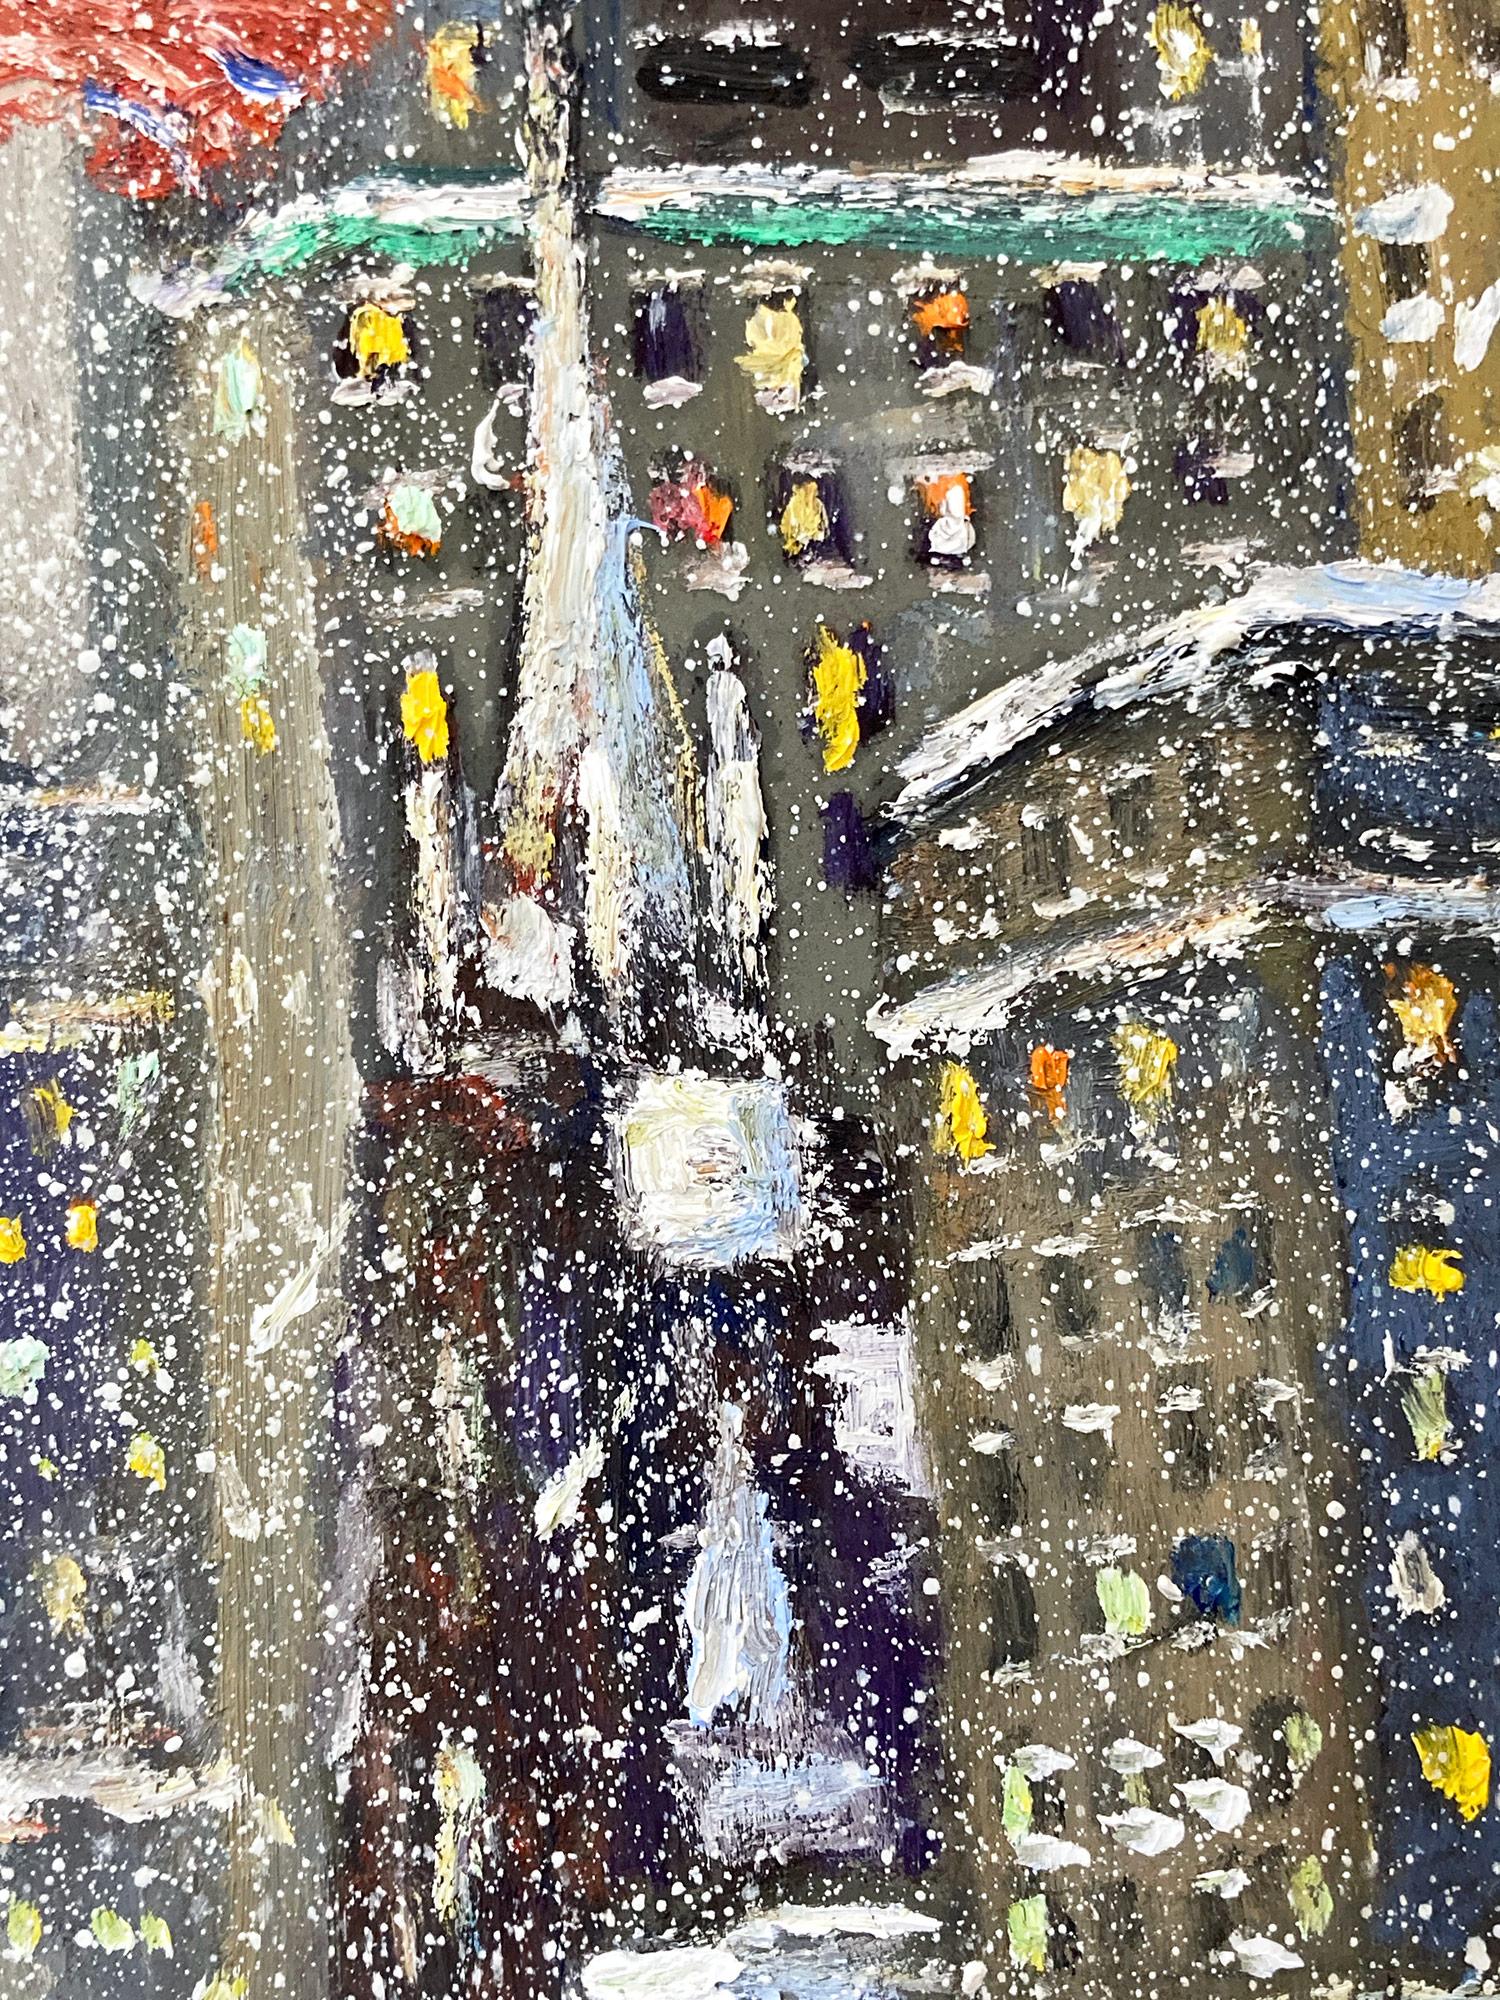 Impressionist New York City winter city-scene depicting Broadway by Trinity Church with American flags, cars and pedestrians in a most intimate, yet energetic way. Christopher is known for capturing the beauty and simplicity of an earlier time of